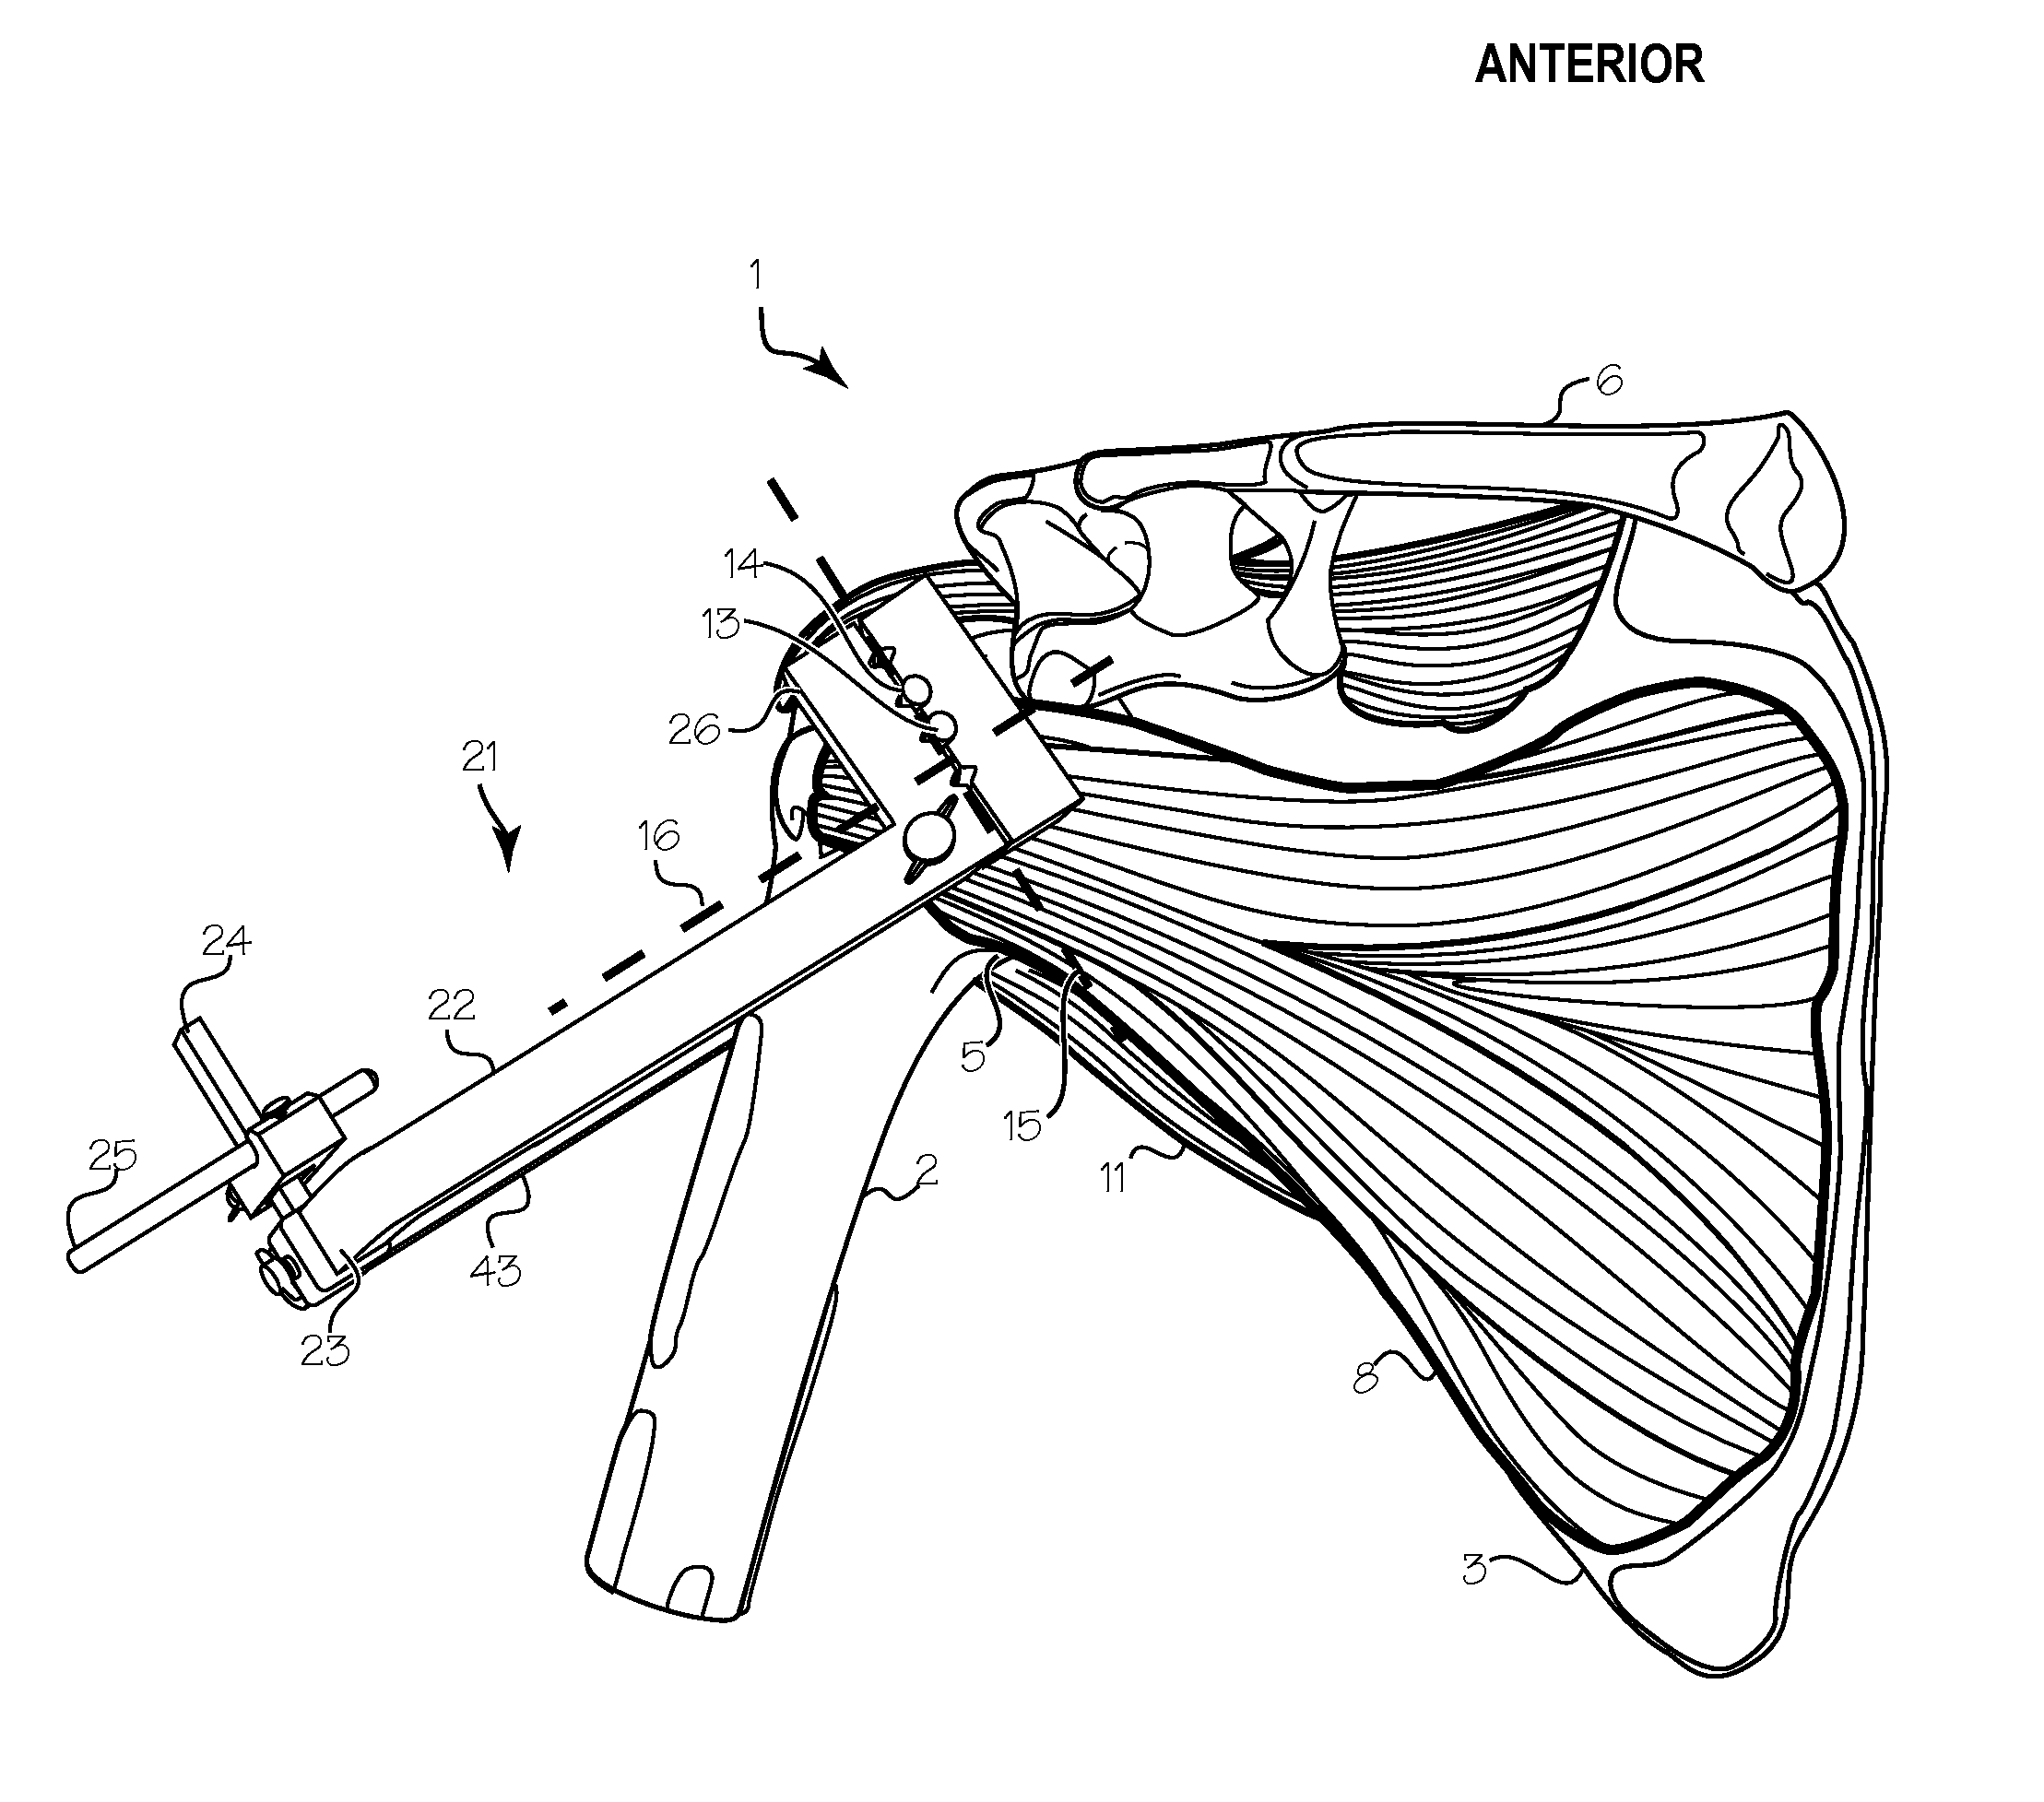 Method of Humeral Head Resurfacing and/or Replacement and System for Accomplishing the Method